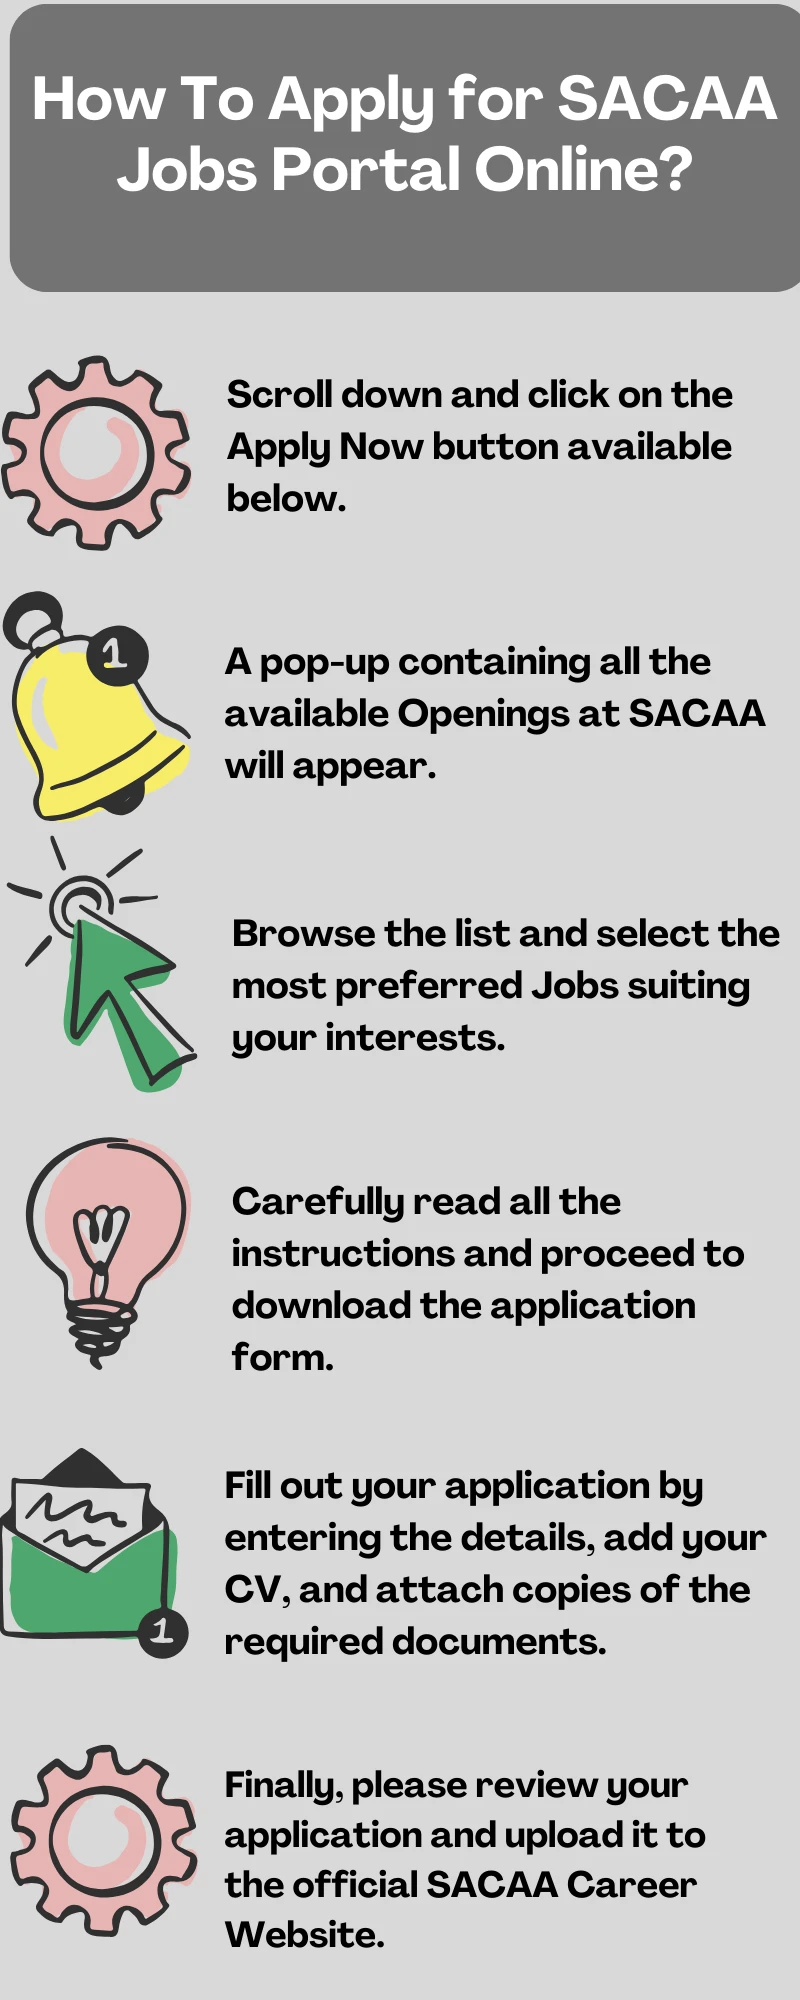 How To Apply for SACAA Jobs Portal Online?